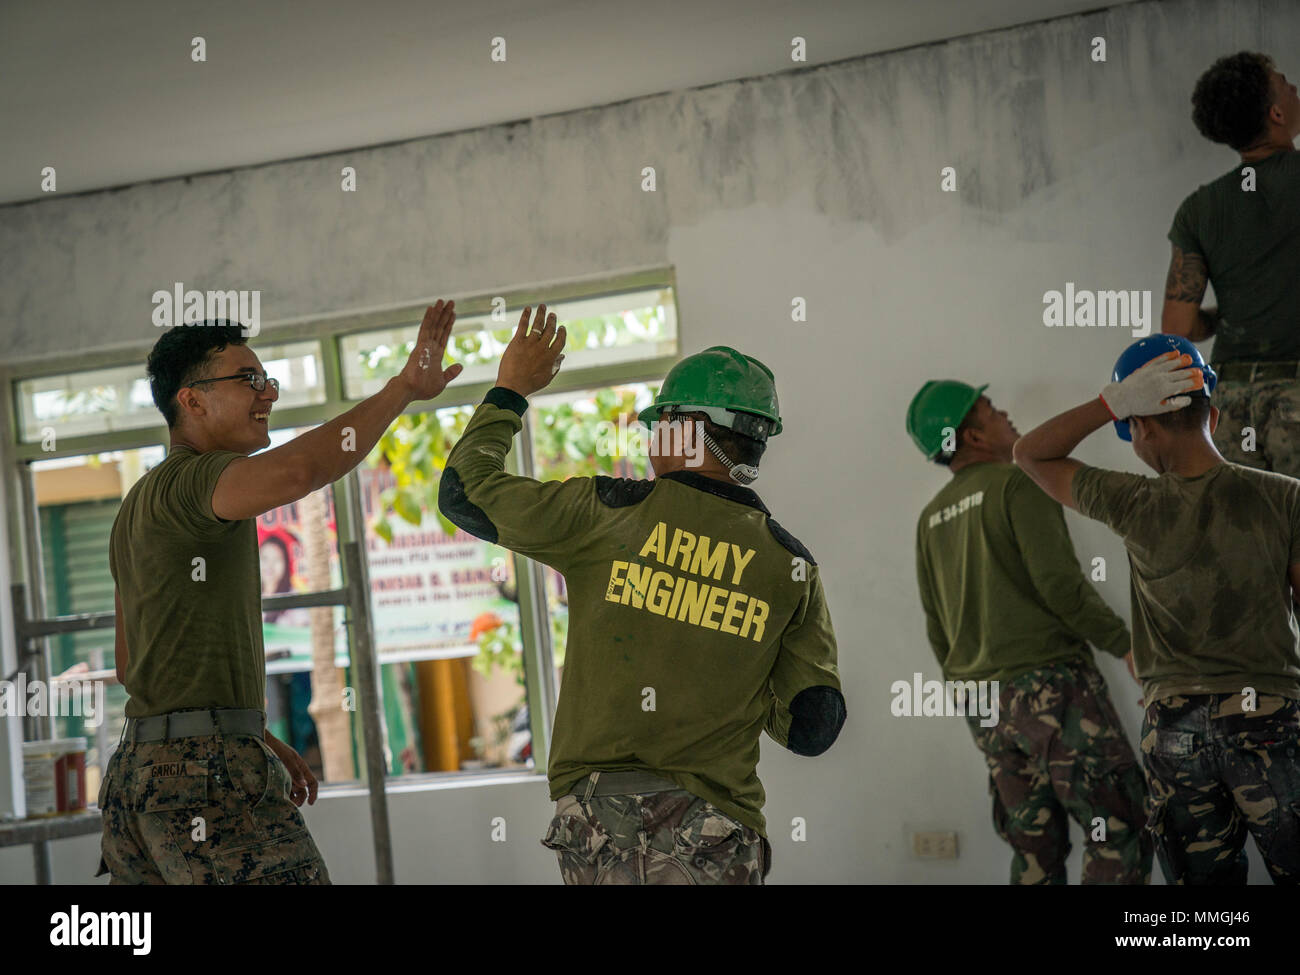 U.S. Marine Corps Sgt. Andreas Garcia (left) and Philippine Army Pfc. Dickson Hermoso (center) high five each other during construction in support of Exercise Balikatan at Calangitan Elementary School in Capas, Tarlac, Philippines, May 6, 2018. Garcia is a combat engineer with Alpha Company, 9th Engineer Support Battalion, and is a 23-year-old native of Chicago, Illinois. Hermoso is an electrician with 522nd Engineering Construction Battalion, 51st Engineering Brigade, and is a 30-year-old native of North Cotabato, Philippines. Exercise Balikatan, in its 34th iteration, is an annual U.S.-Phili Stock Photo